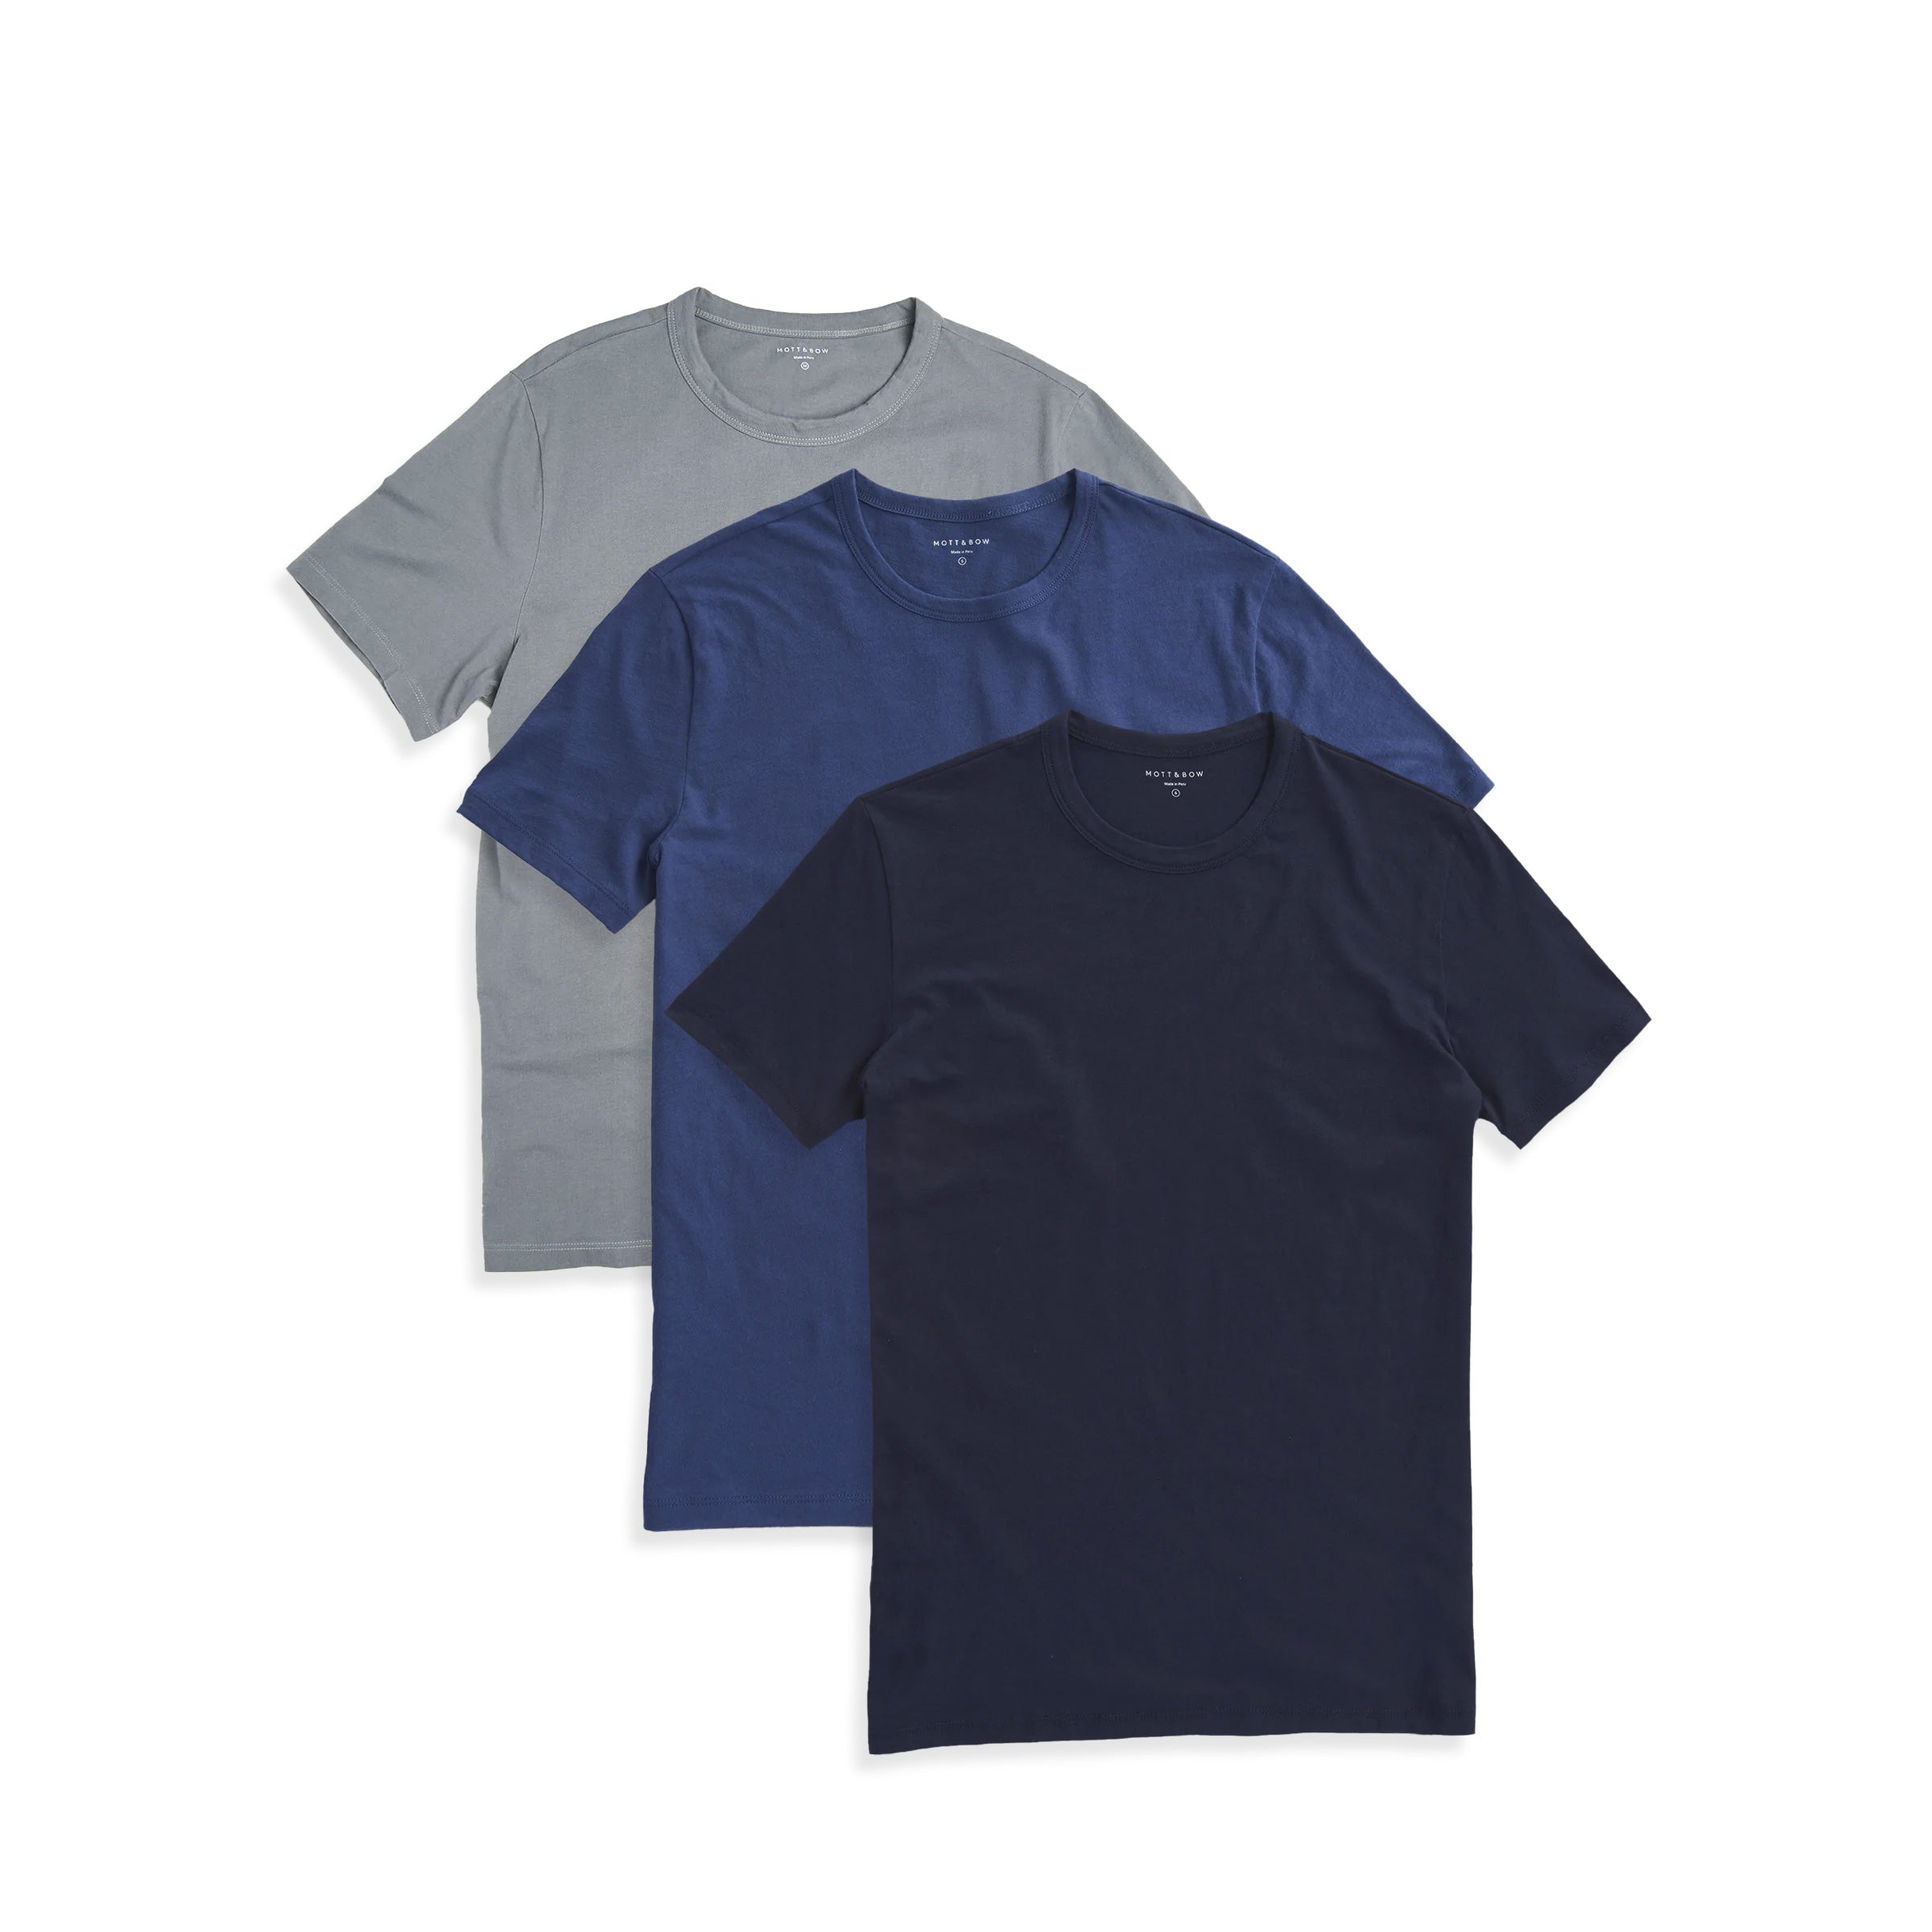 Men wearing Faded Charcoal/Baltic Blue/Navy Classic Crew Driggs 3-Pack tees